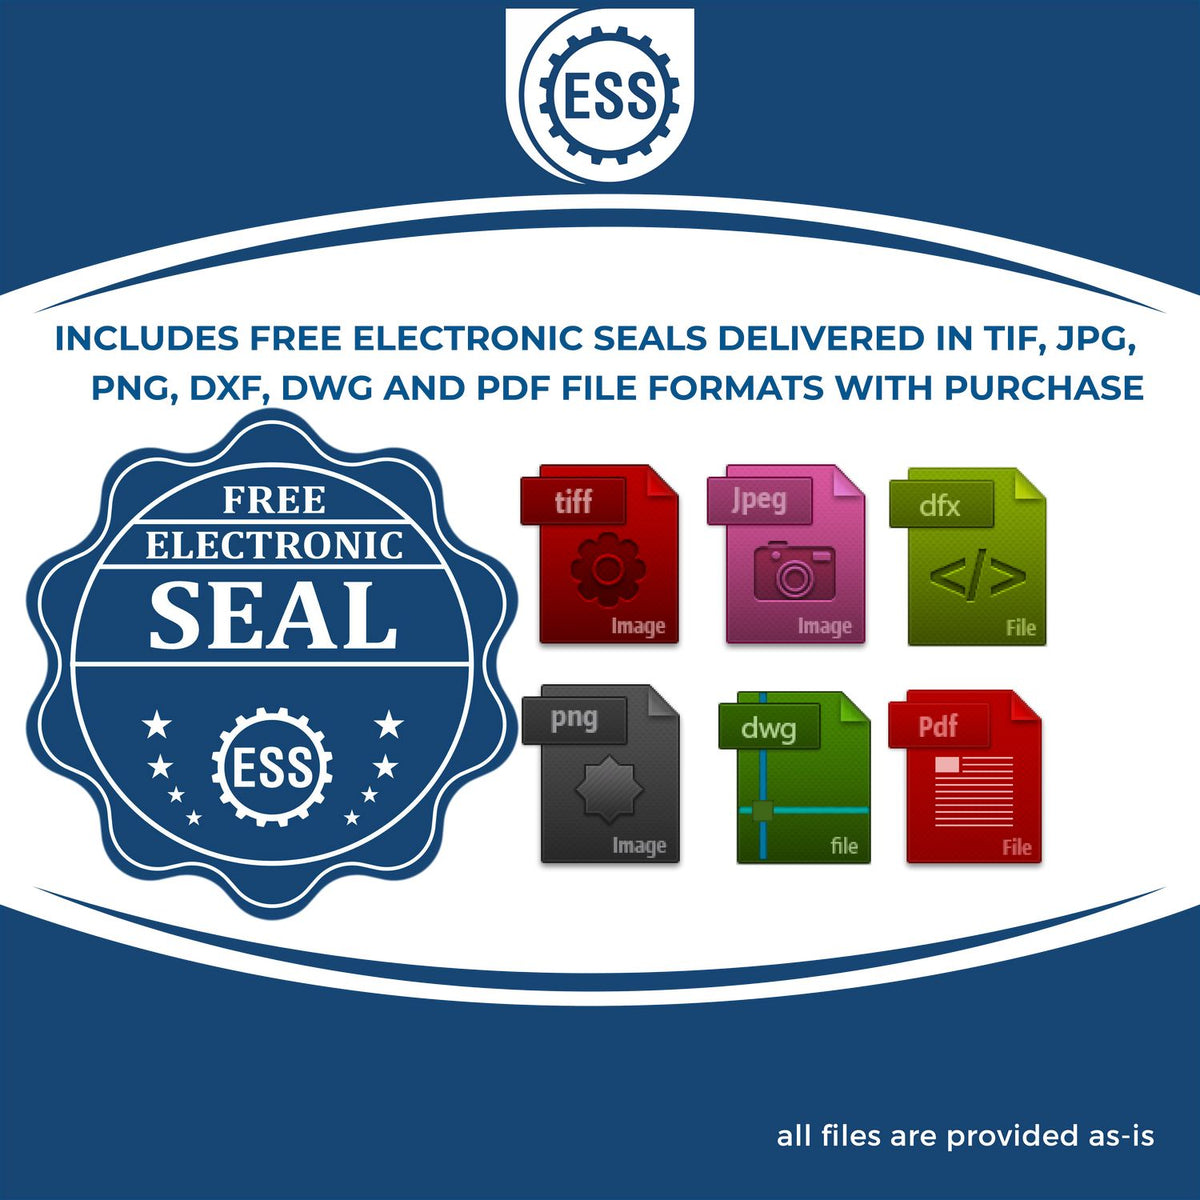 An infographic for the free electronic seal for the Kentucky Engineer Desk Seal illustrating the different file type icons such as DXF, DWG, TIF, JPG and PNG.